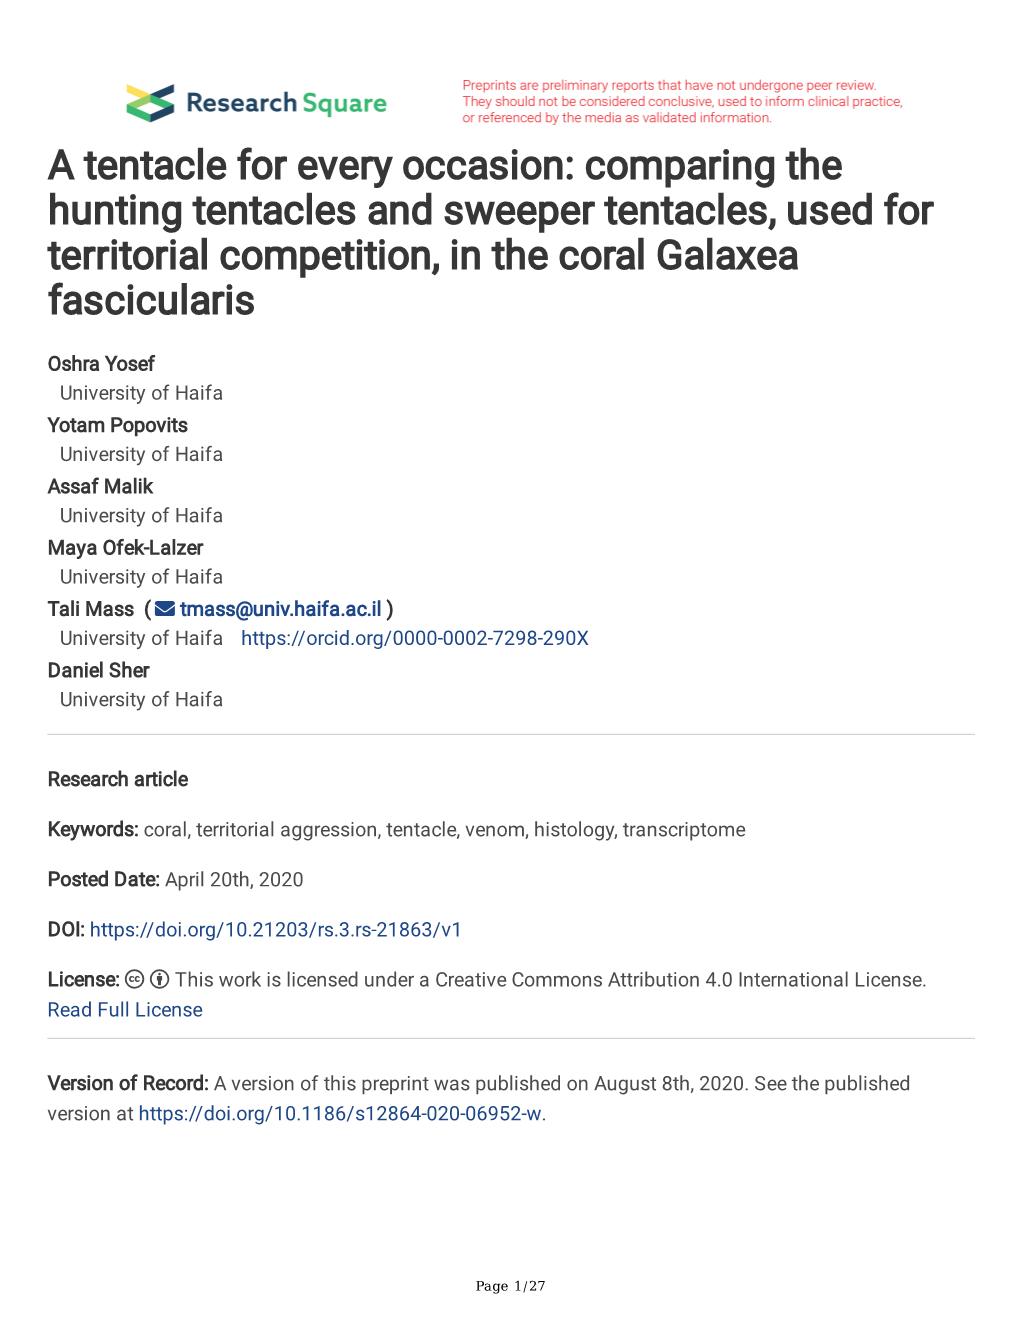 A Tentacle for Every Occasion: Comparing the Hunting Tentacles and Sweeper Tentacles, Used for Territorial Competition, in the Coral Galaxea Fascicularis